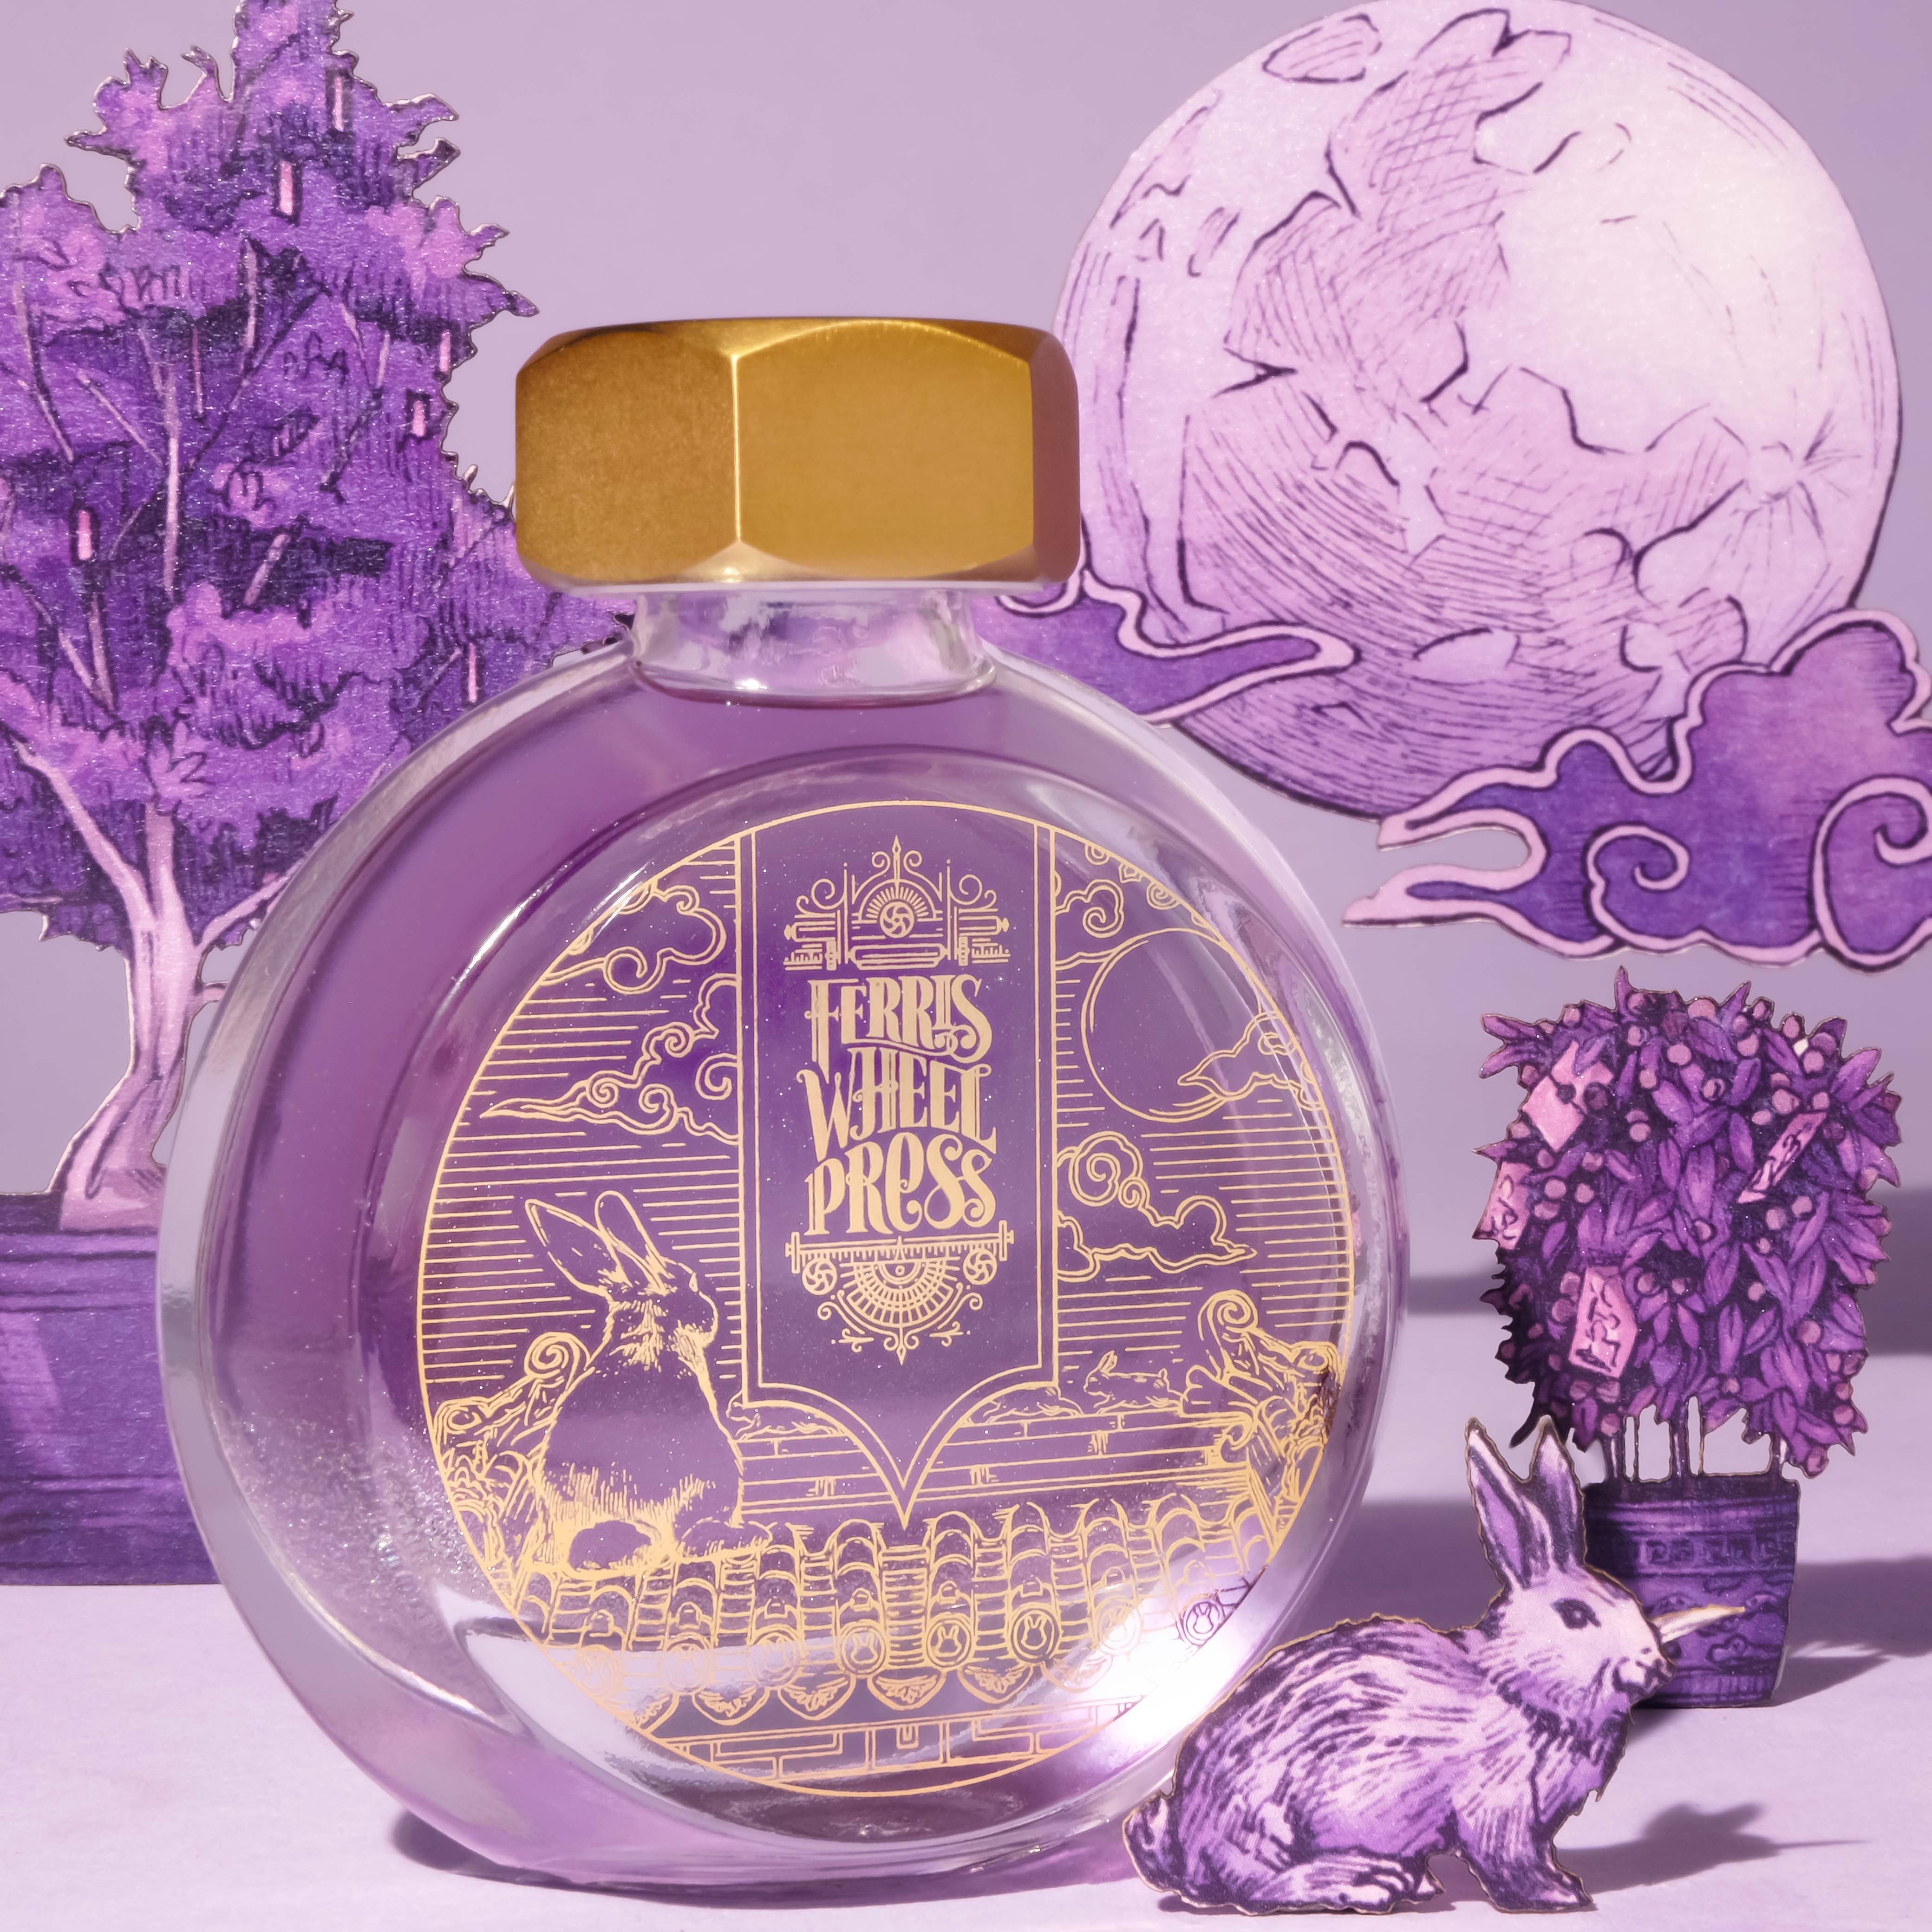 Curious Collaborations | Special Edition Lunar New Year Purple Jade Rabbit Ink